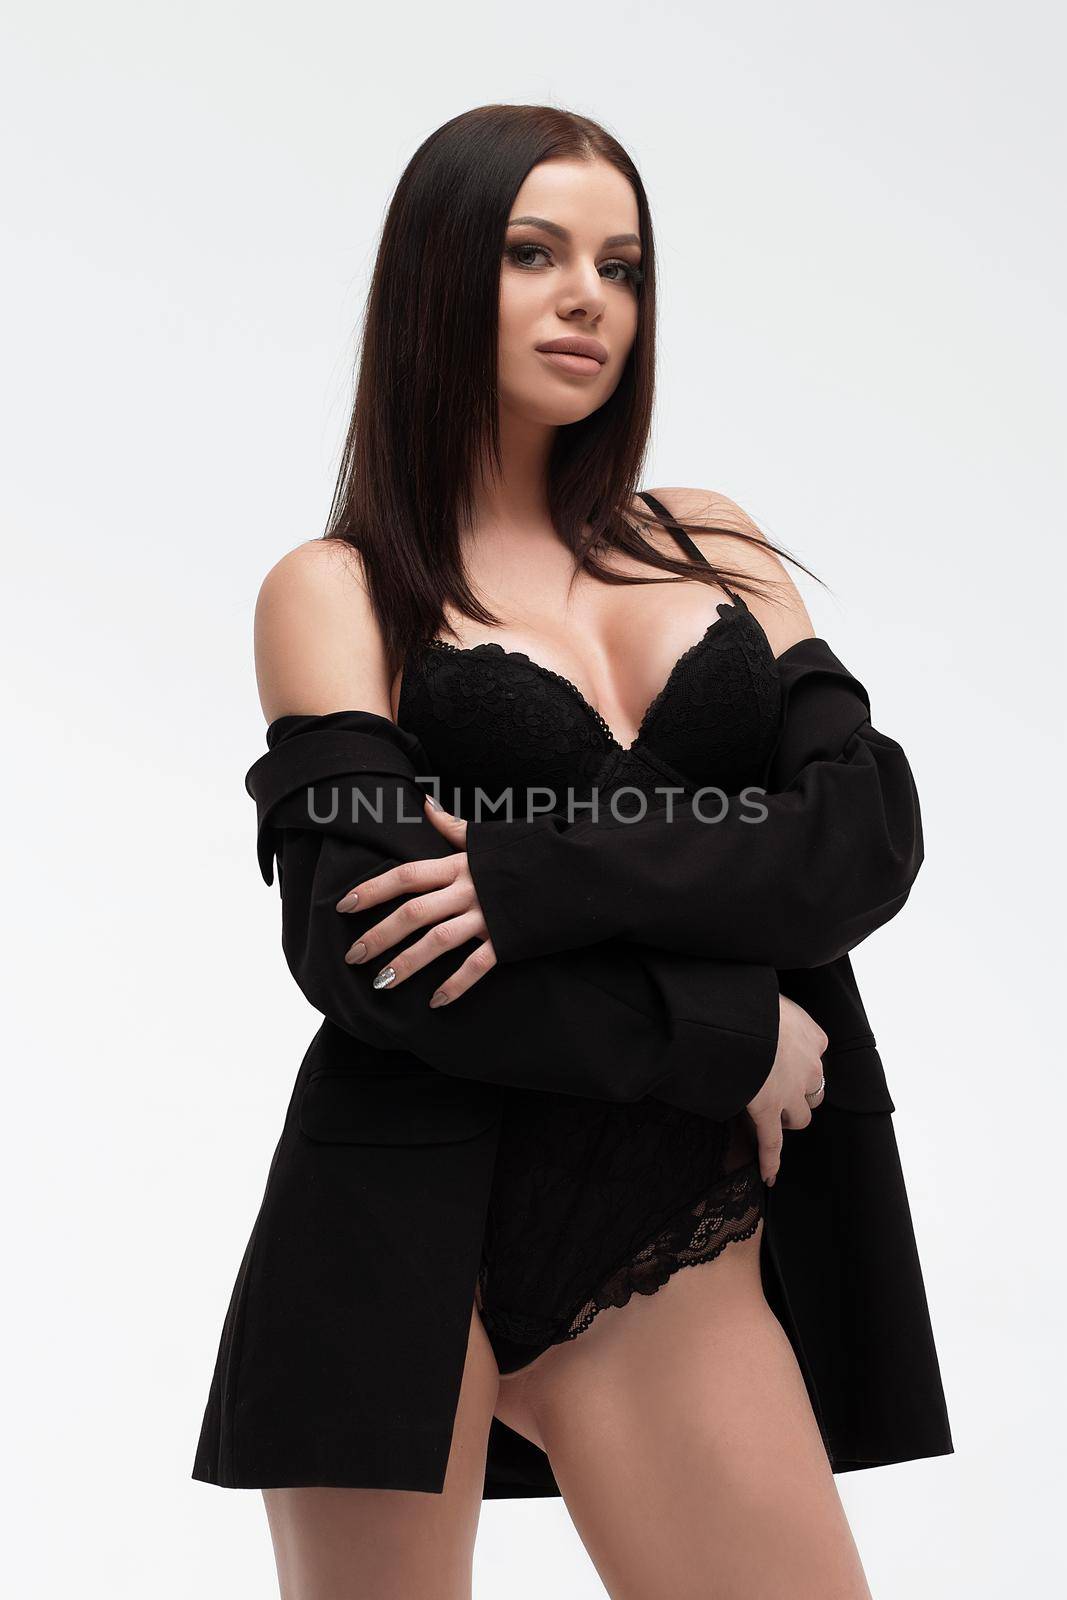 Young slim seductive woman with makeup in black underwear embracing herself while looking at camera